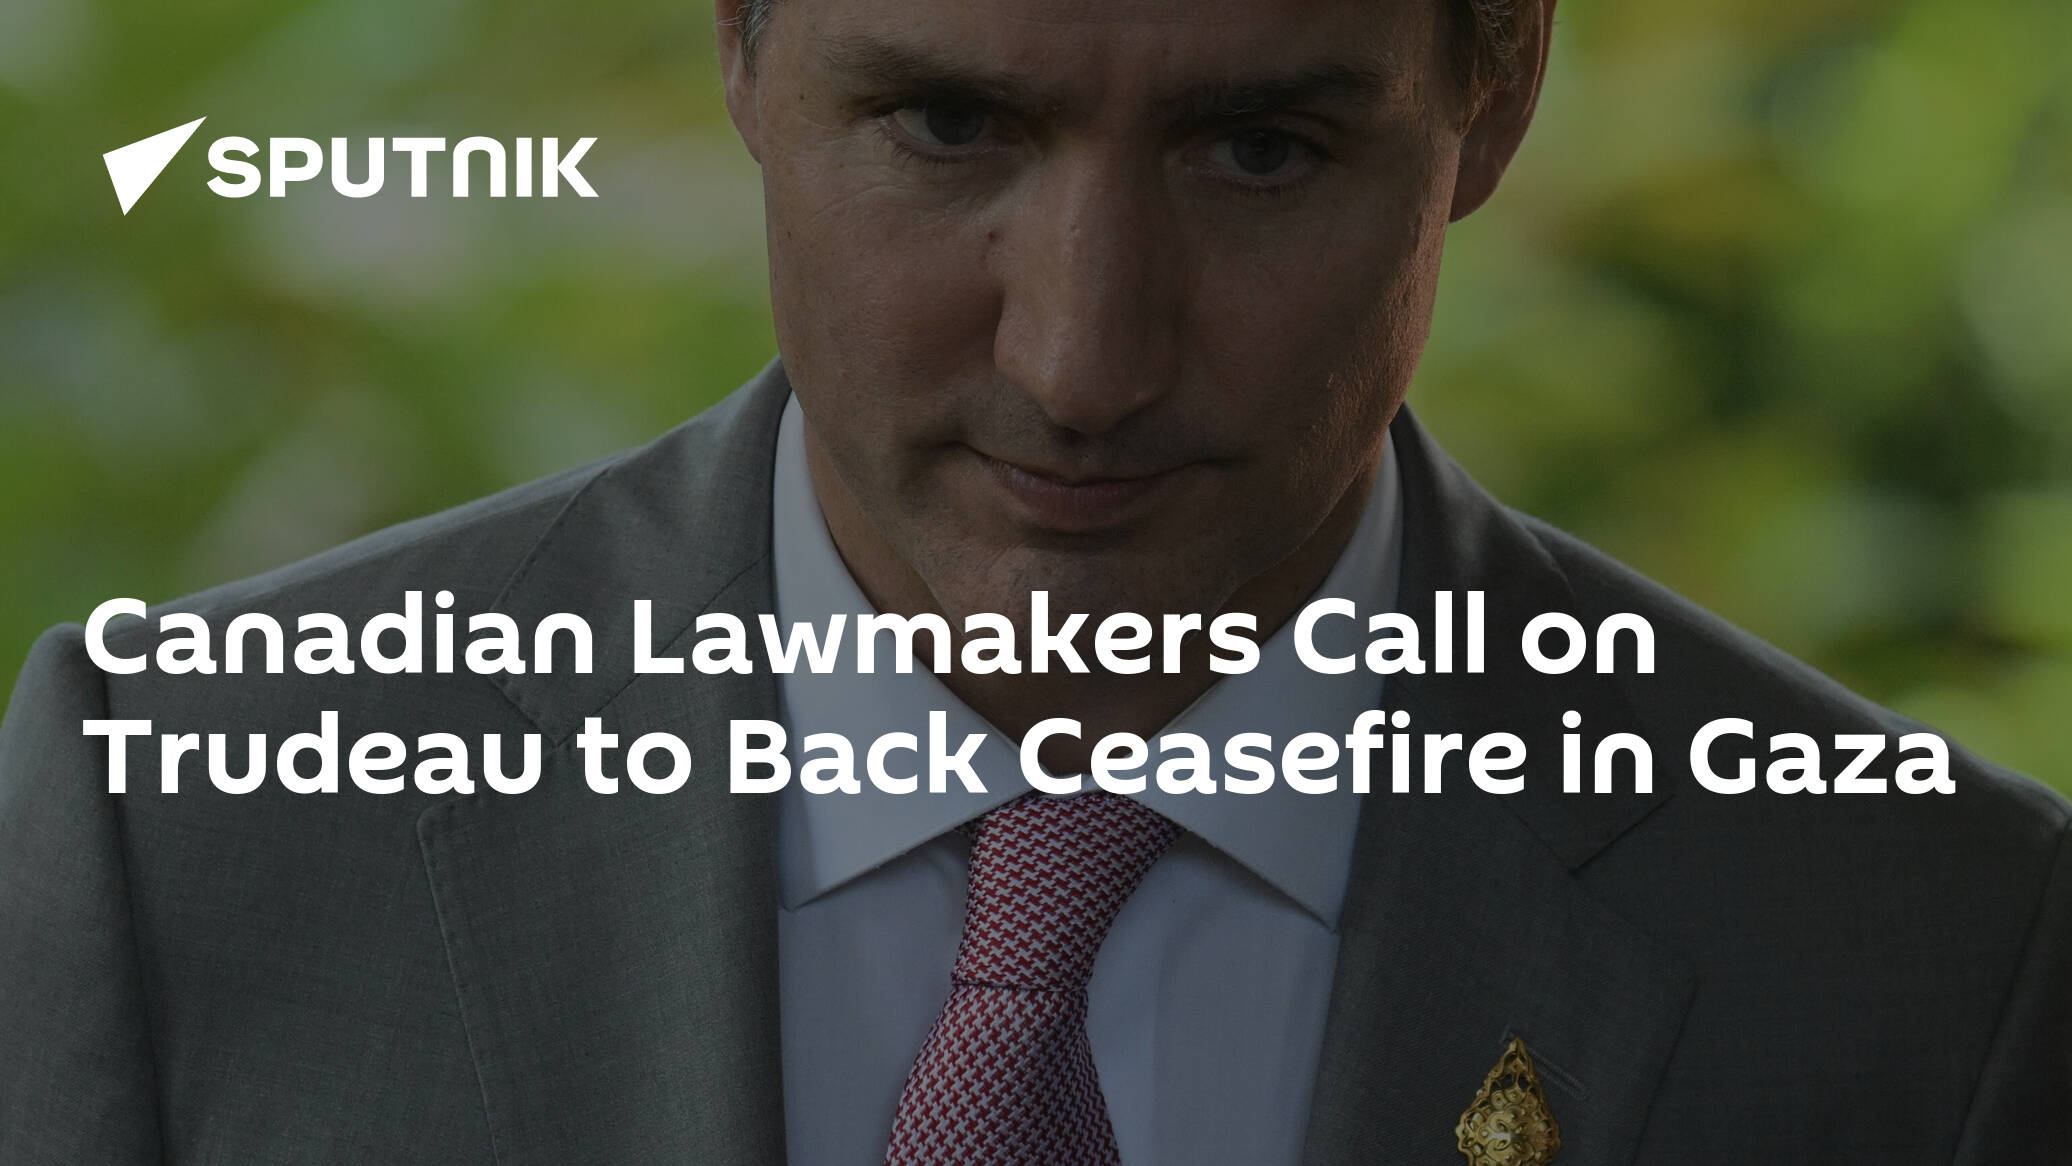 Canadian Lawmakers Call on Trudeau to Back Ceasefire in Gaza